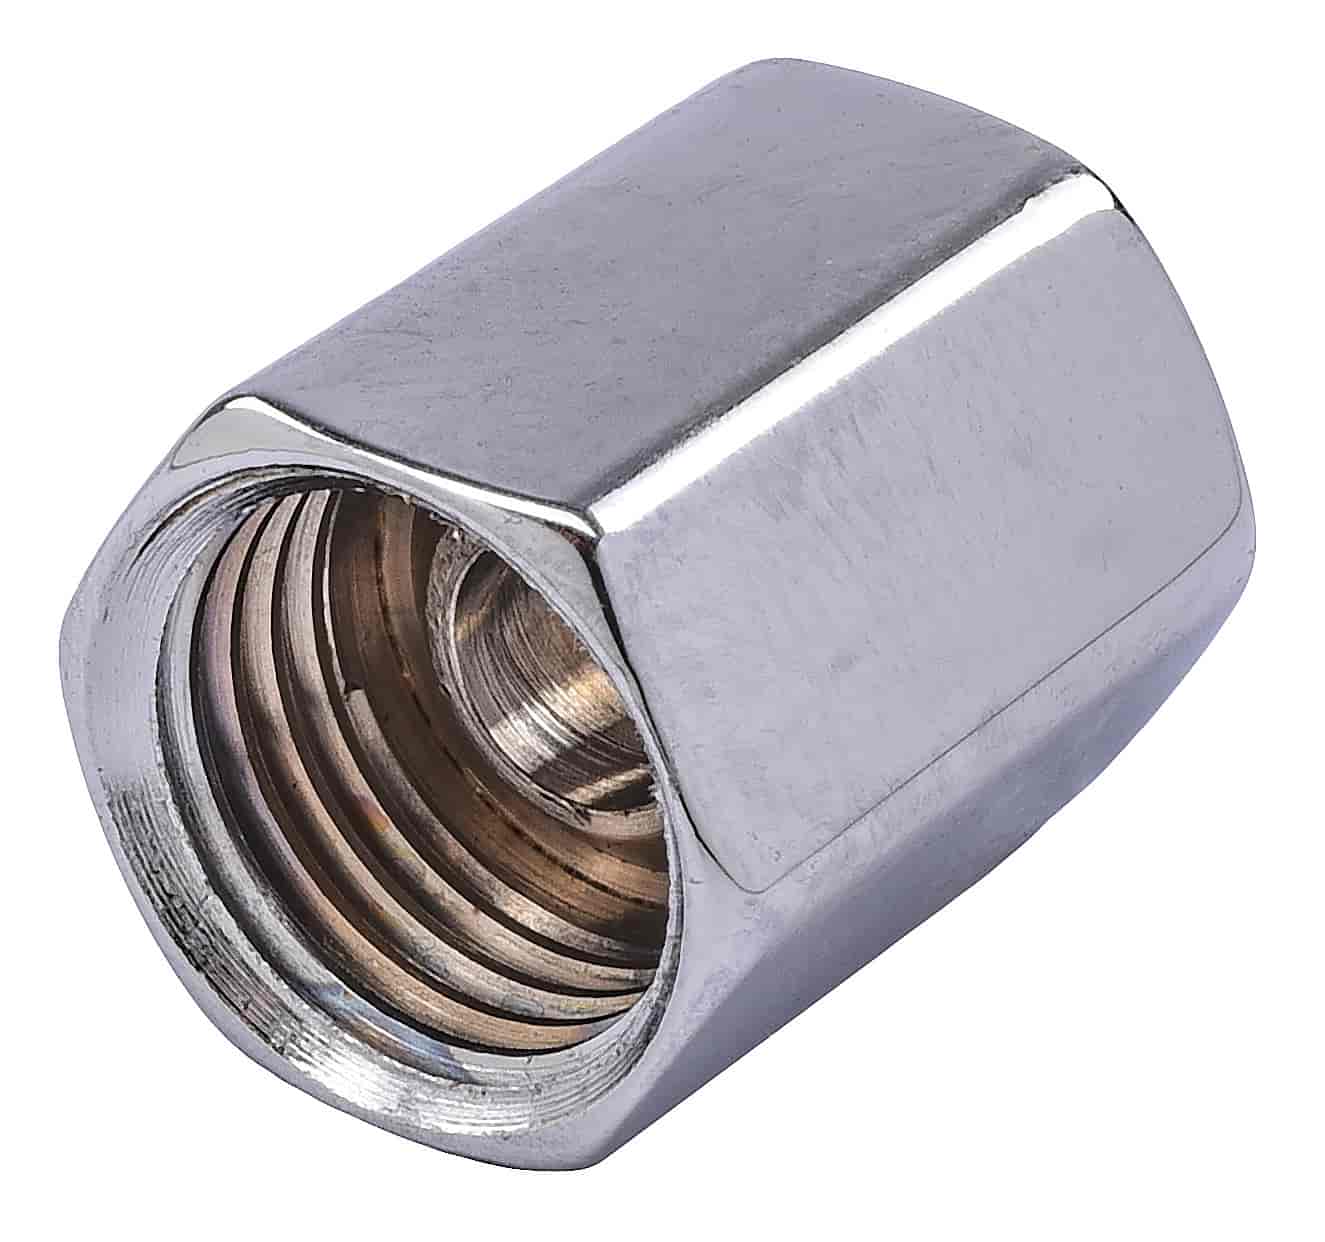 Chrome Union Fitting 1/2 in. -20 Inverted Flare Female x 1/2 in. -20 Inverted Flare Female